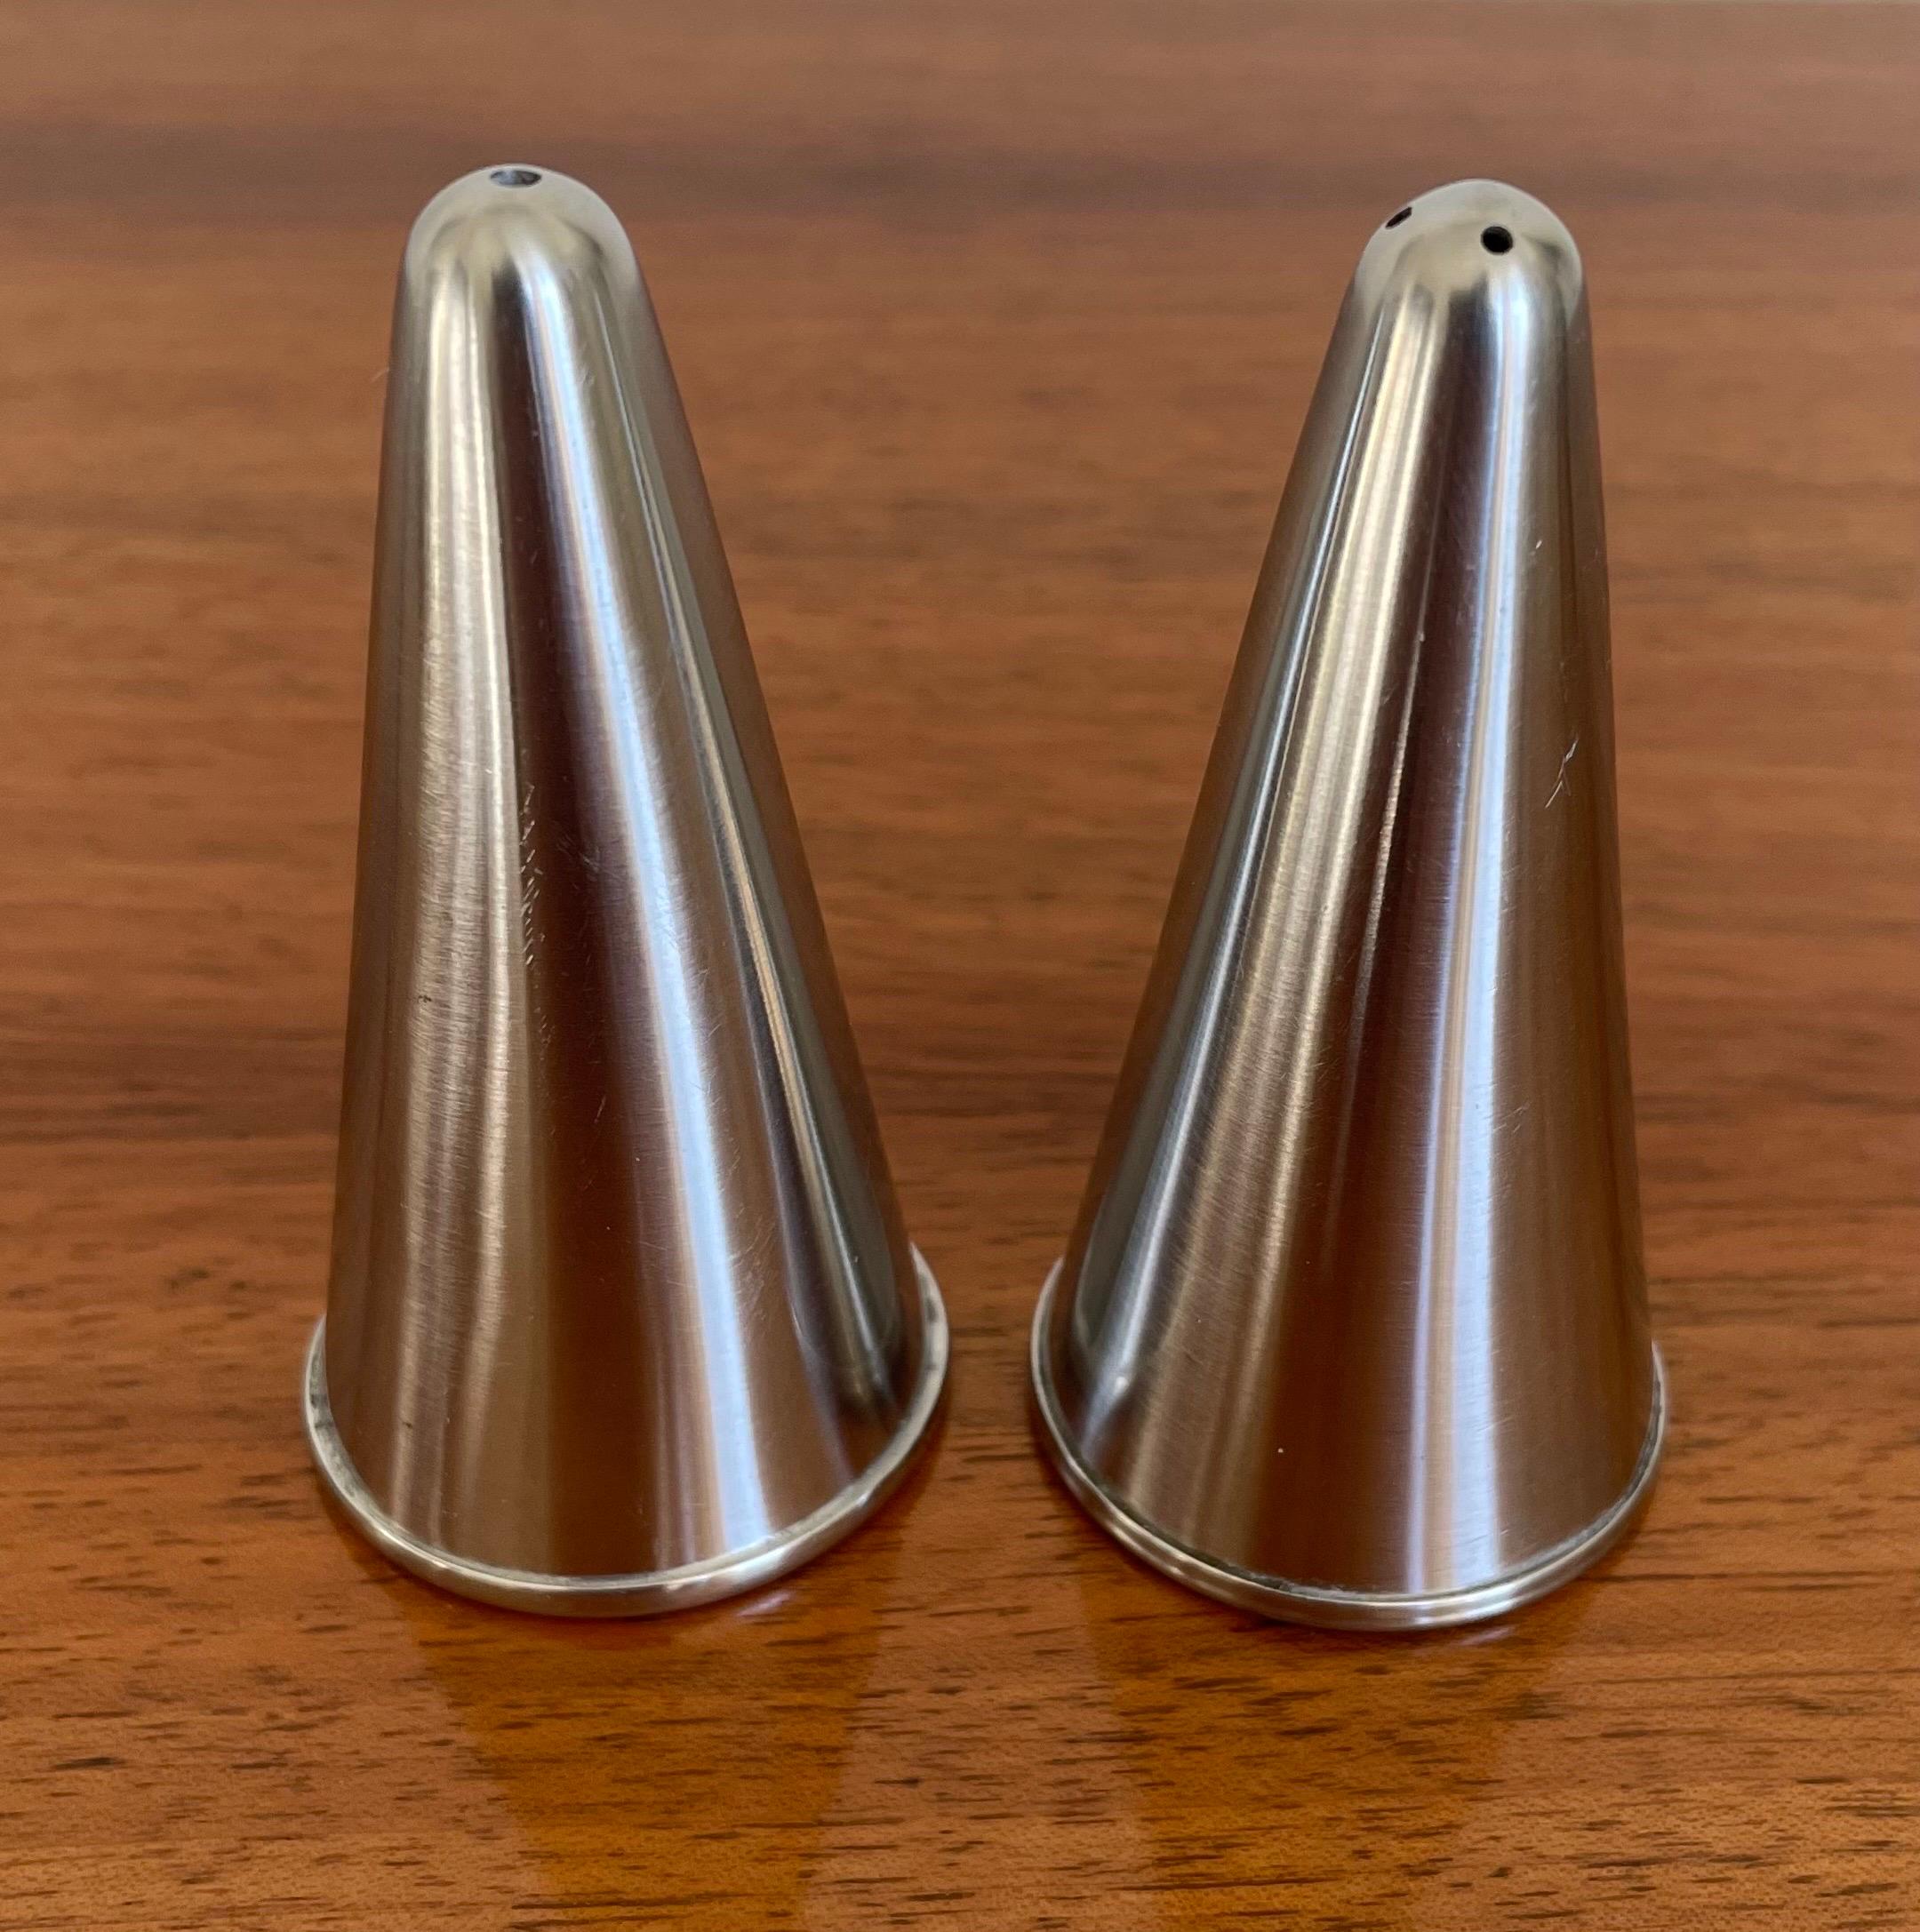 stainless steel salt and pepper shakers